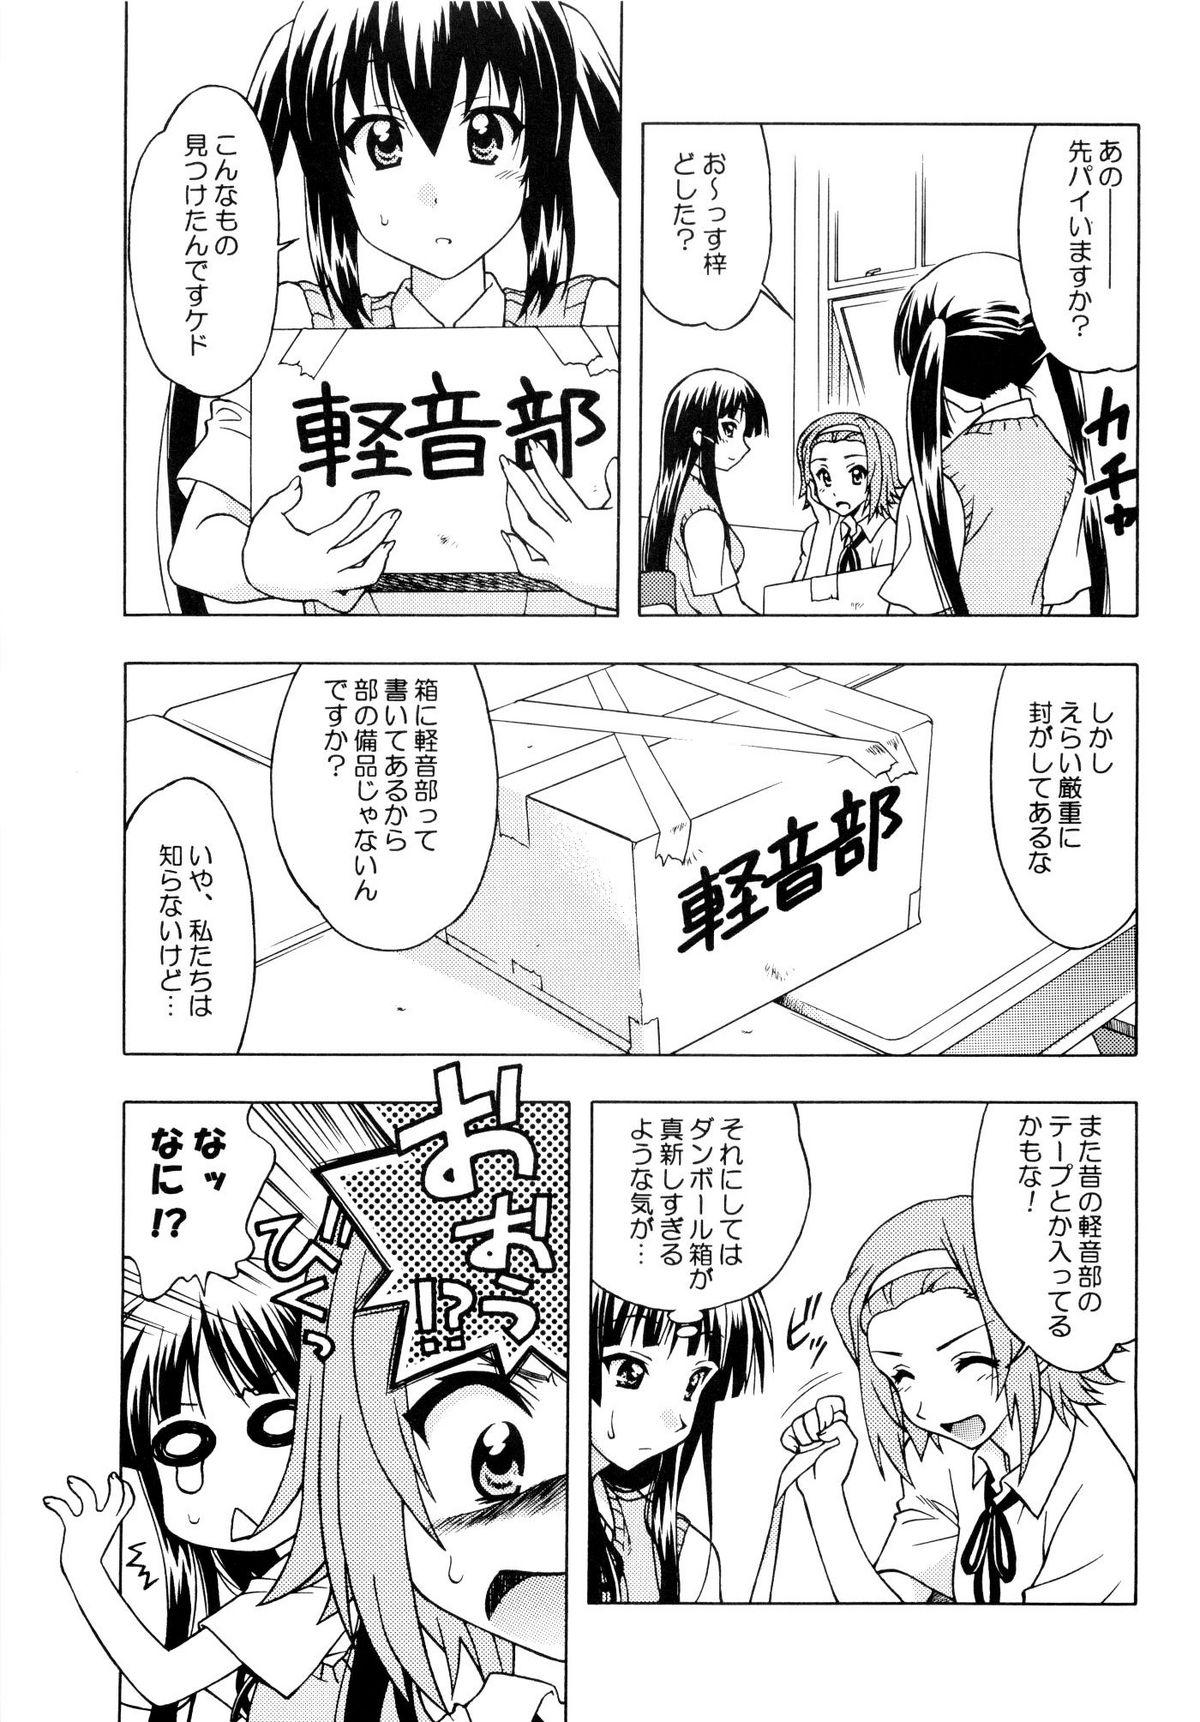 Bubble Butt K-ON! BOX - K-on Teens - Page 2